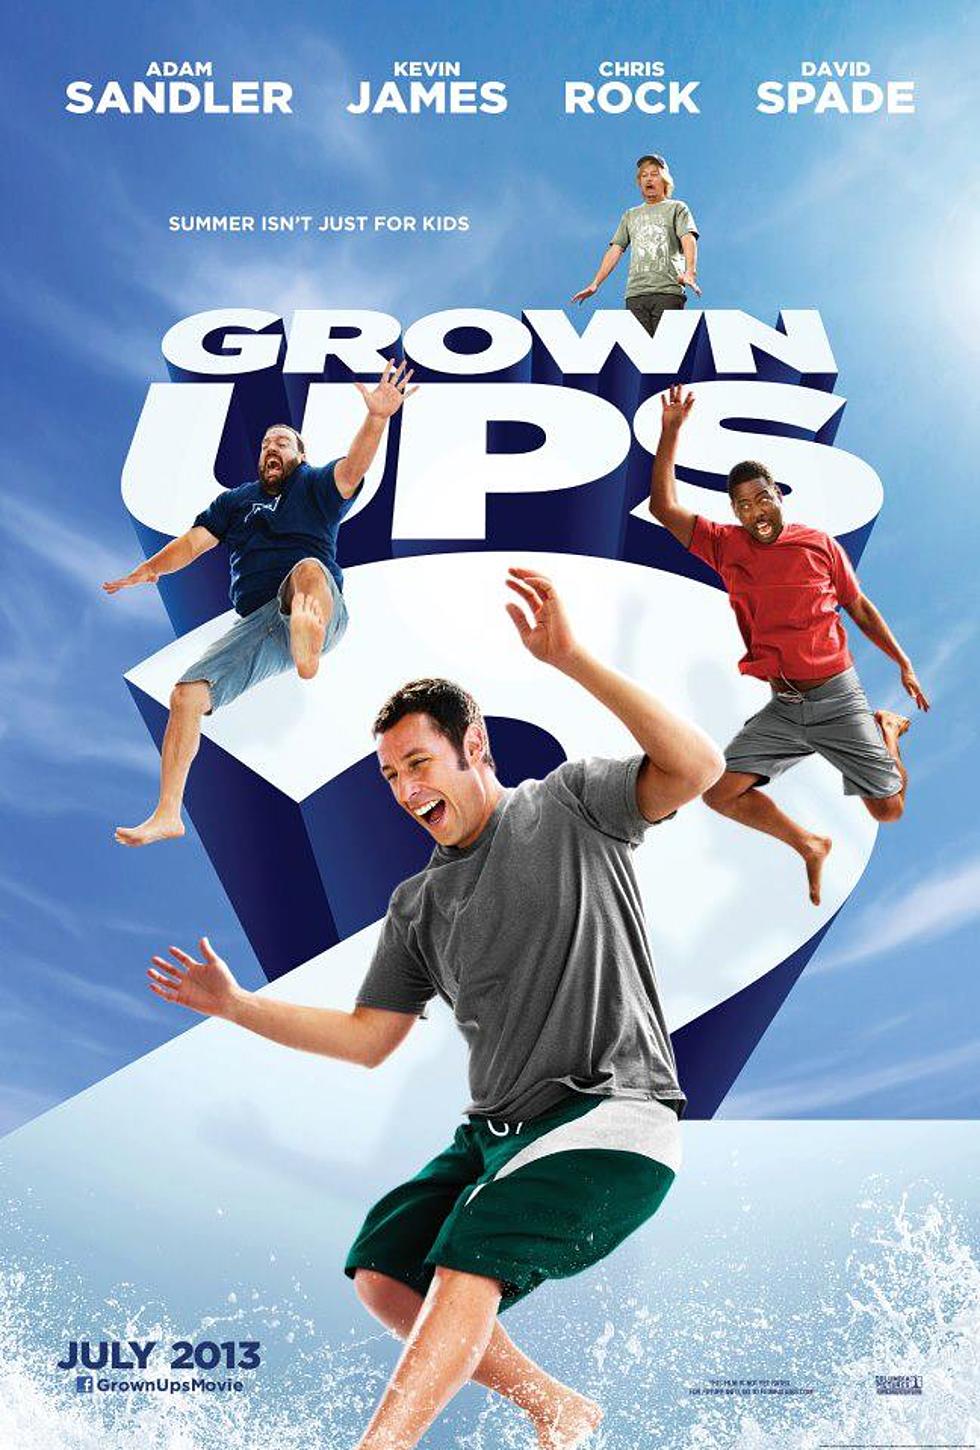 Adam Sandler is Back with &#8220;Grown Ups 2&#8243;- Here&#8217;s What Our Movie Critic Thinks